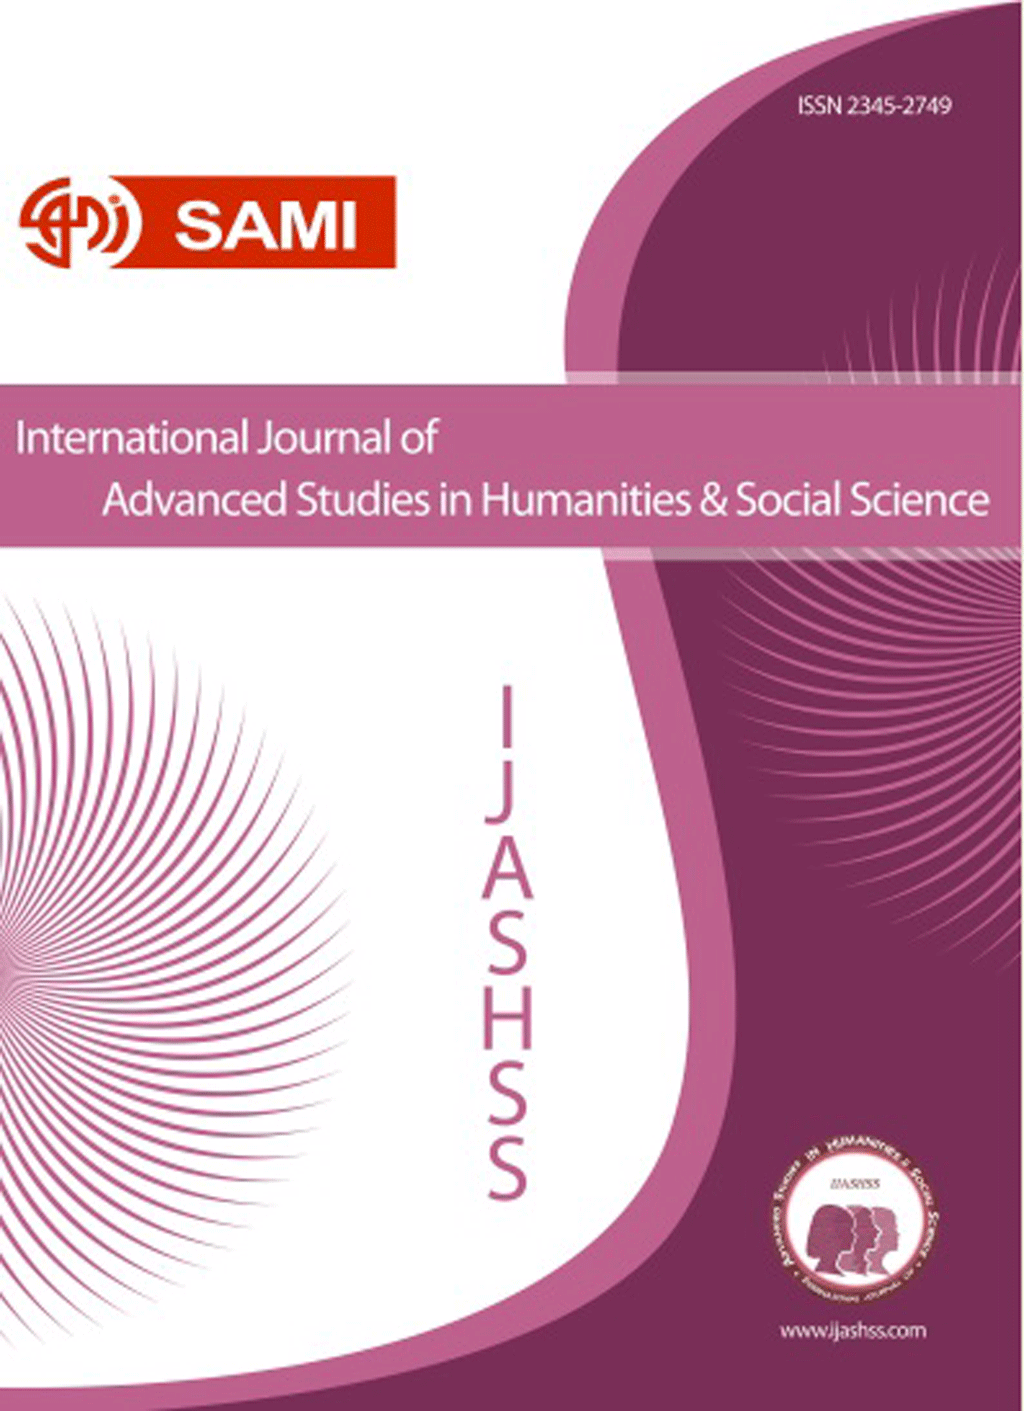 International Journal of Advanced Studies in Humanities and Social Science - January 2019, Volume 8 -  Issue 1